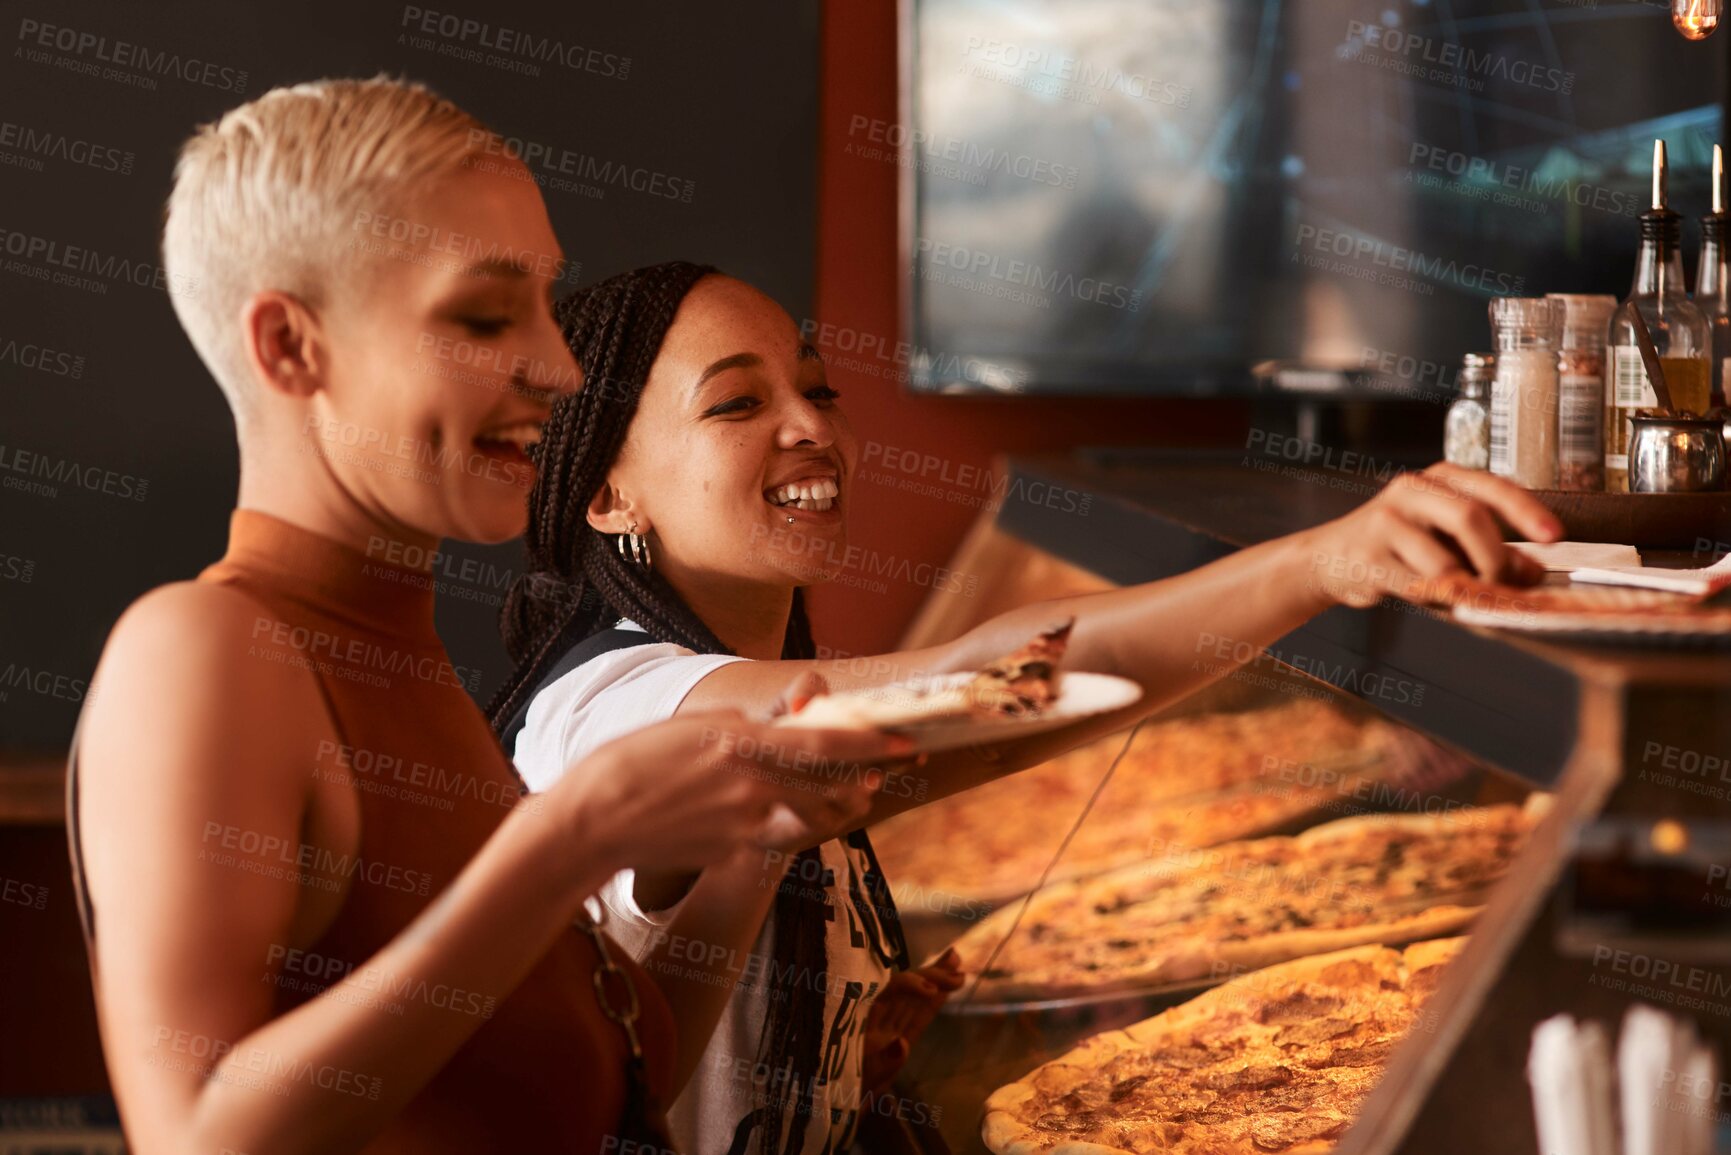 Buy stock photo Cropped shot of friends having pizza at a cafe together